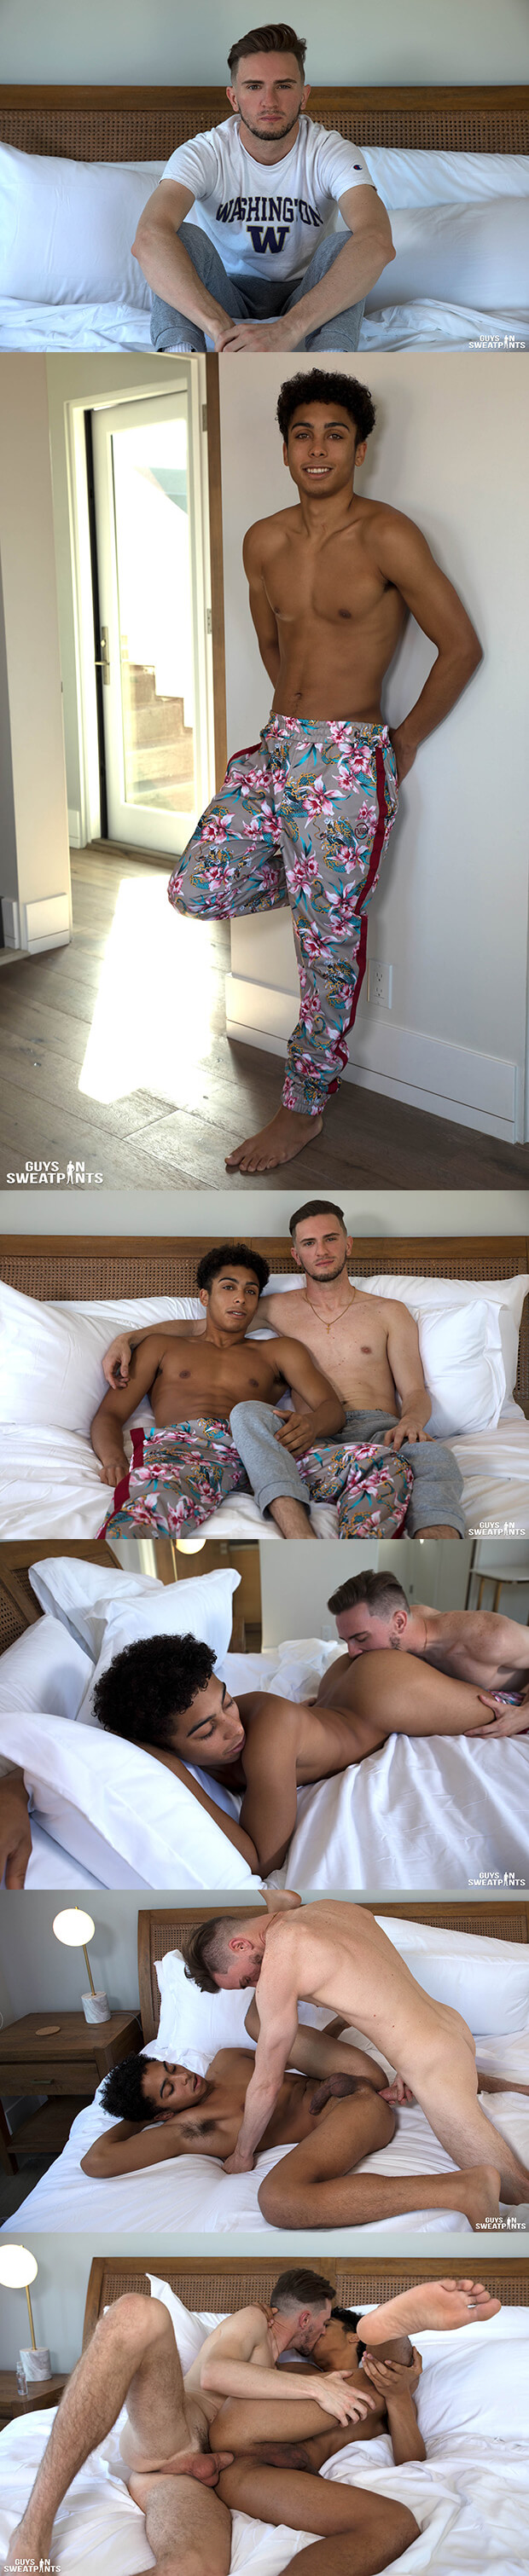 Guys In Sweatpants | Marcus Young and Eli Taylor